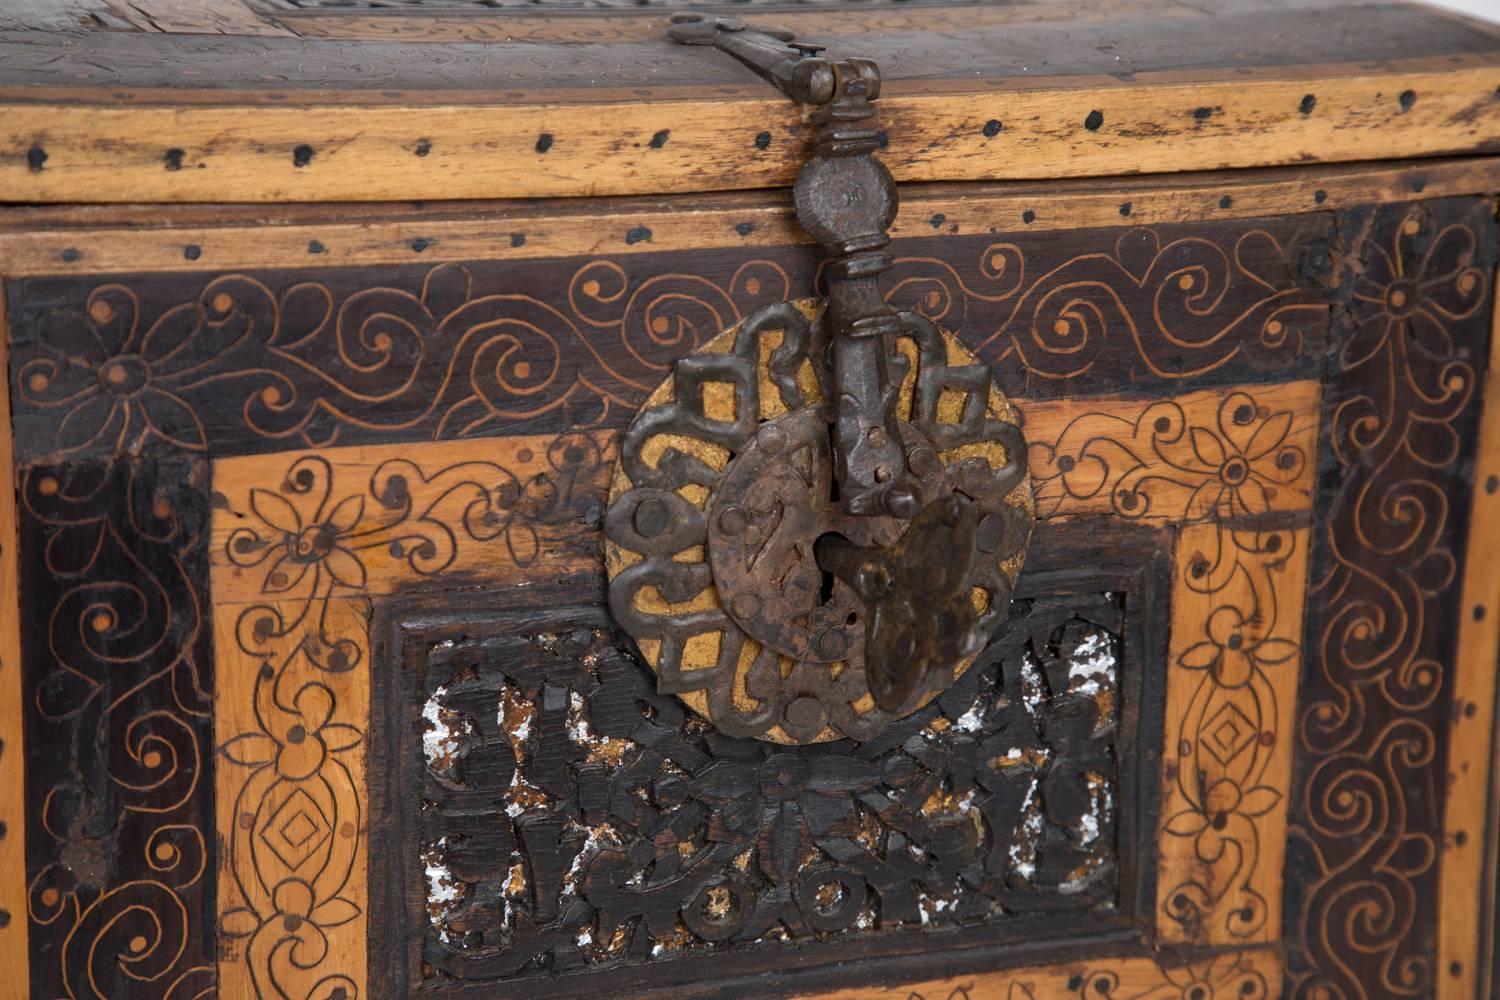 Magnificent 18th century Bolivian locking escritorio with inlaid wood and hand-forged iron details.